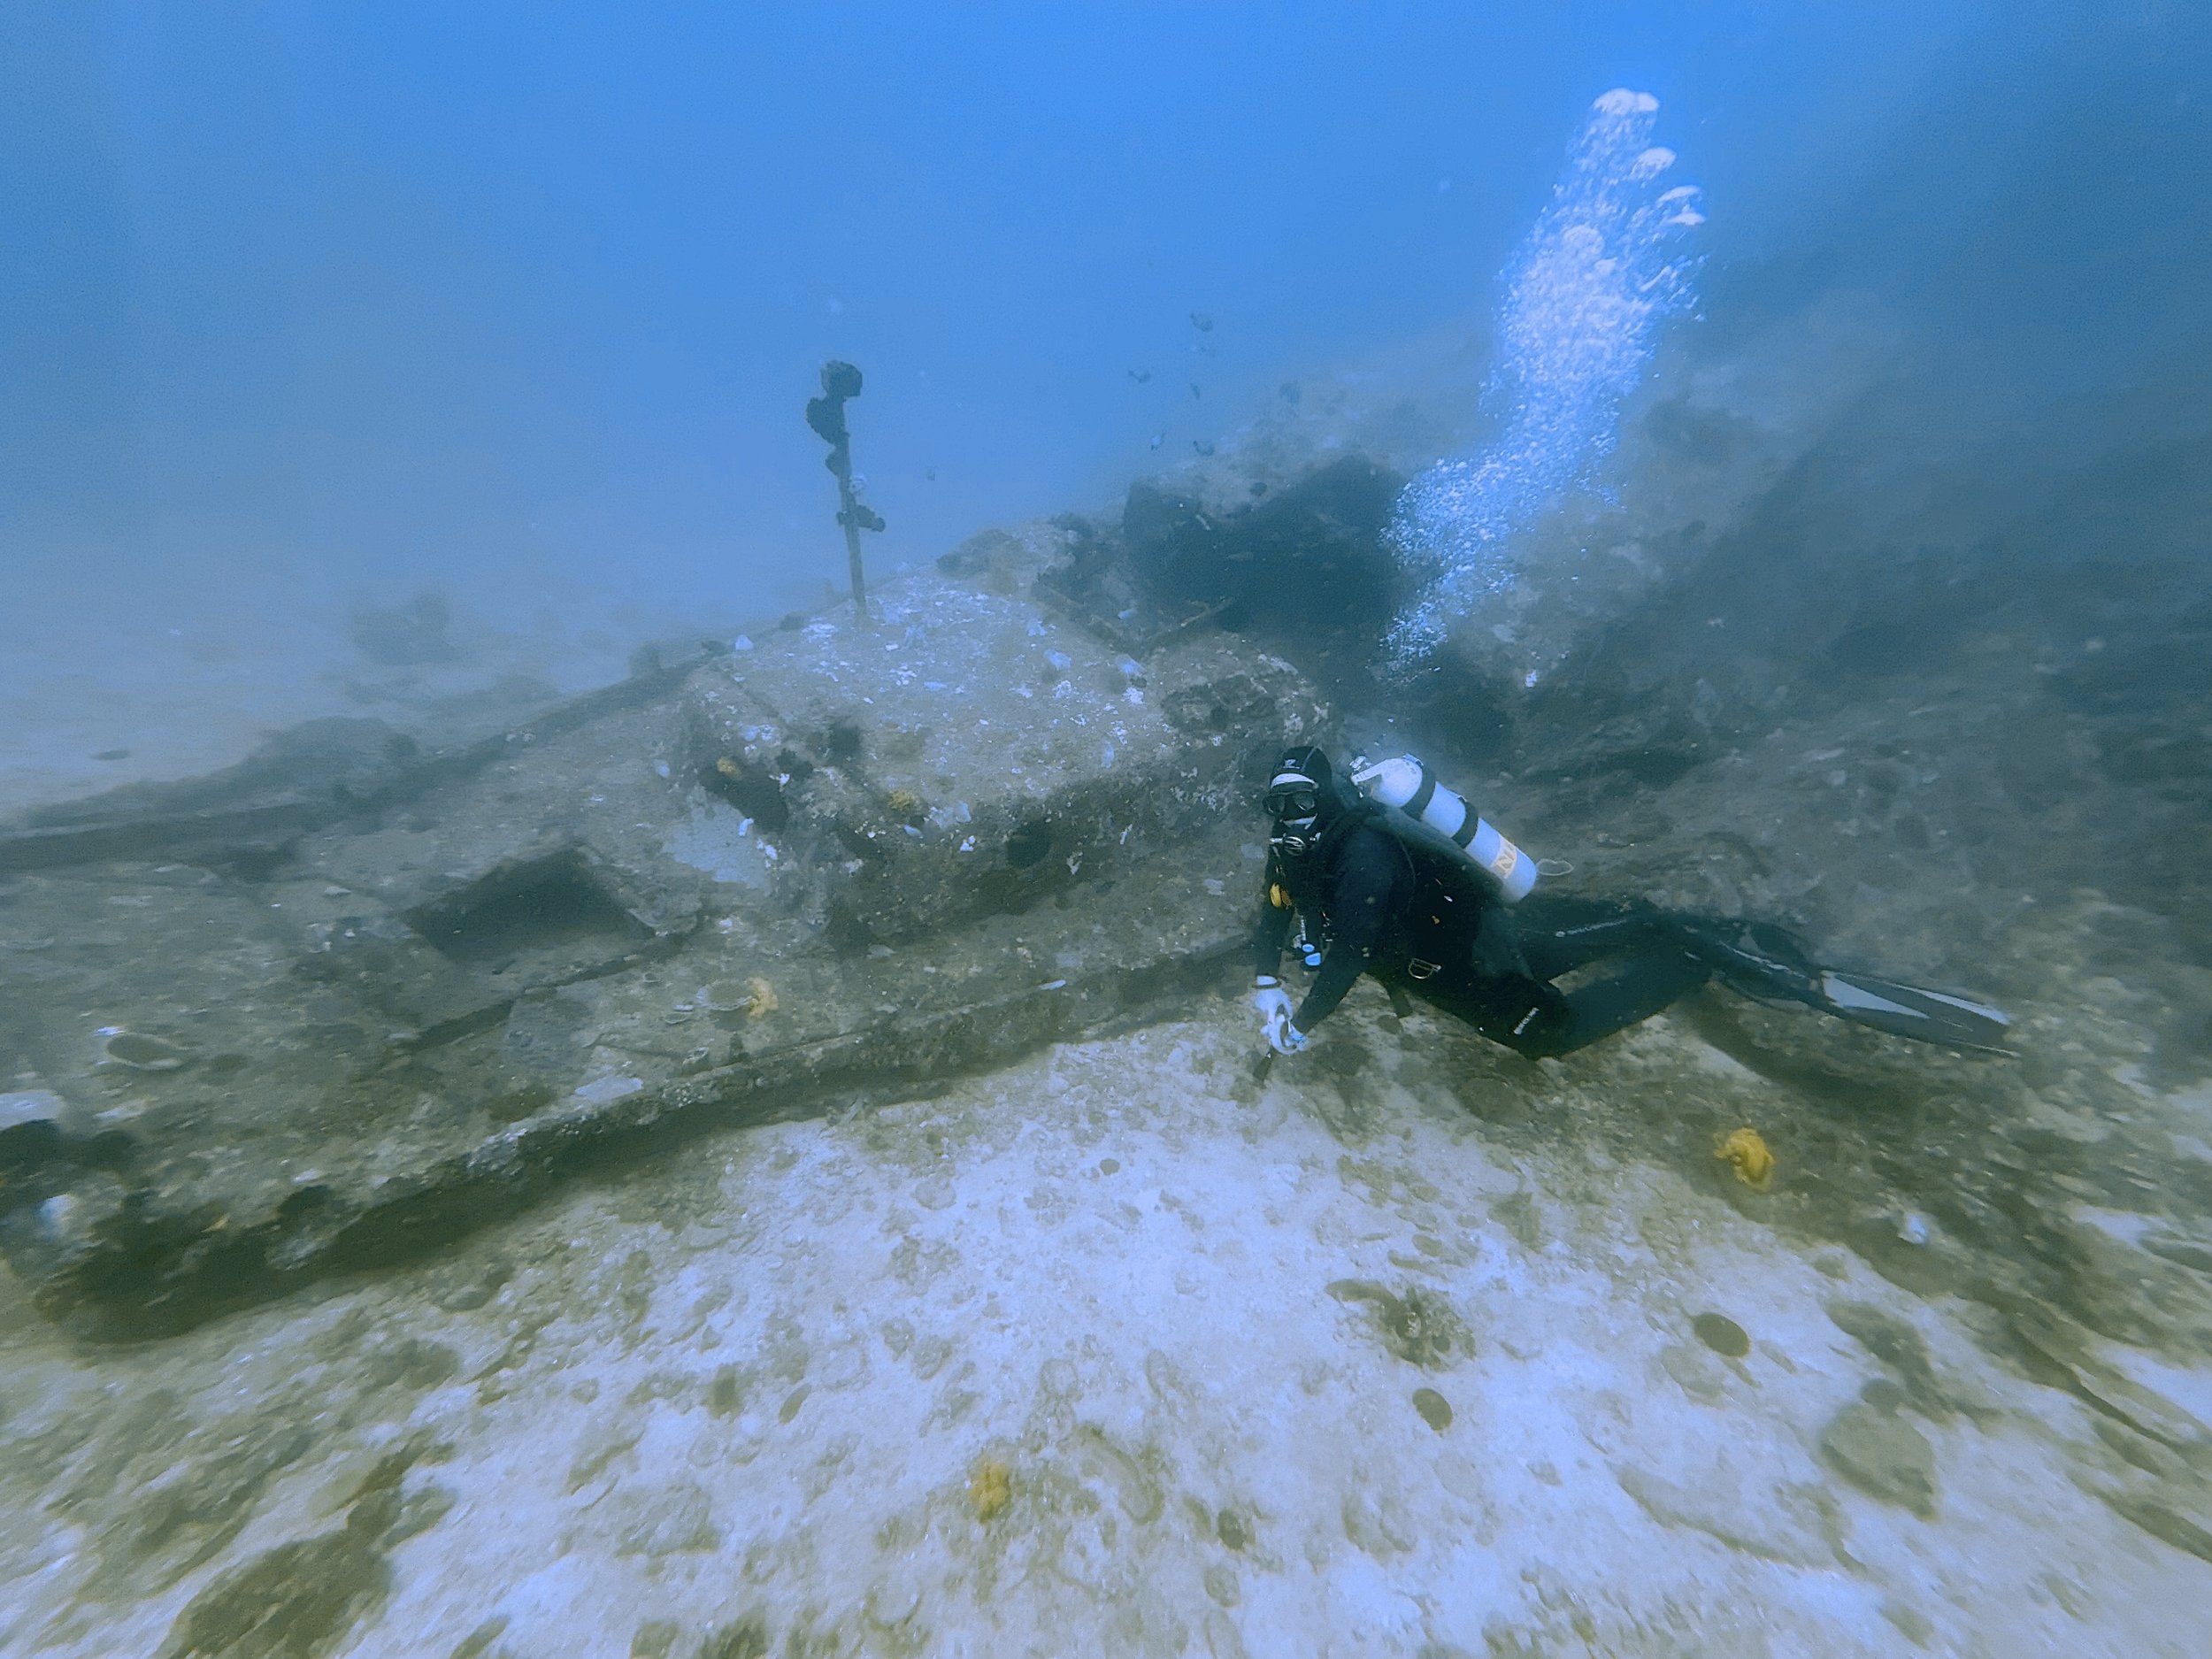 Stephanie at the Balayligue Wreck